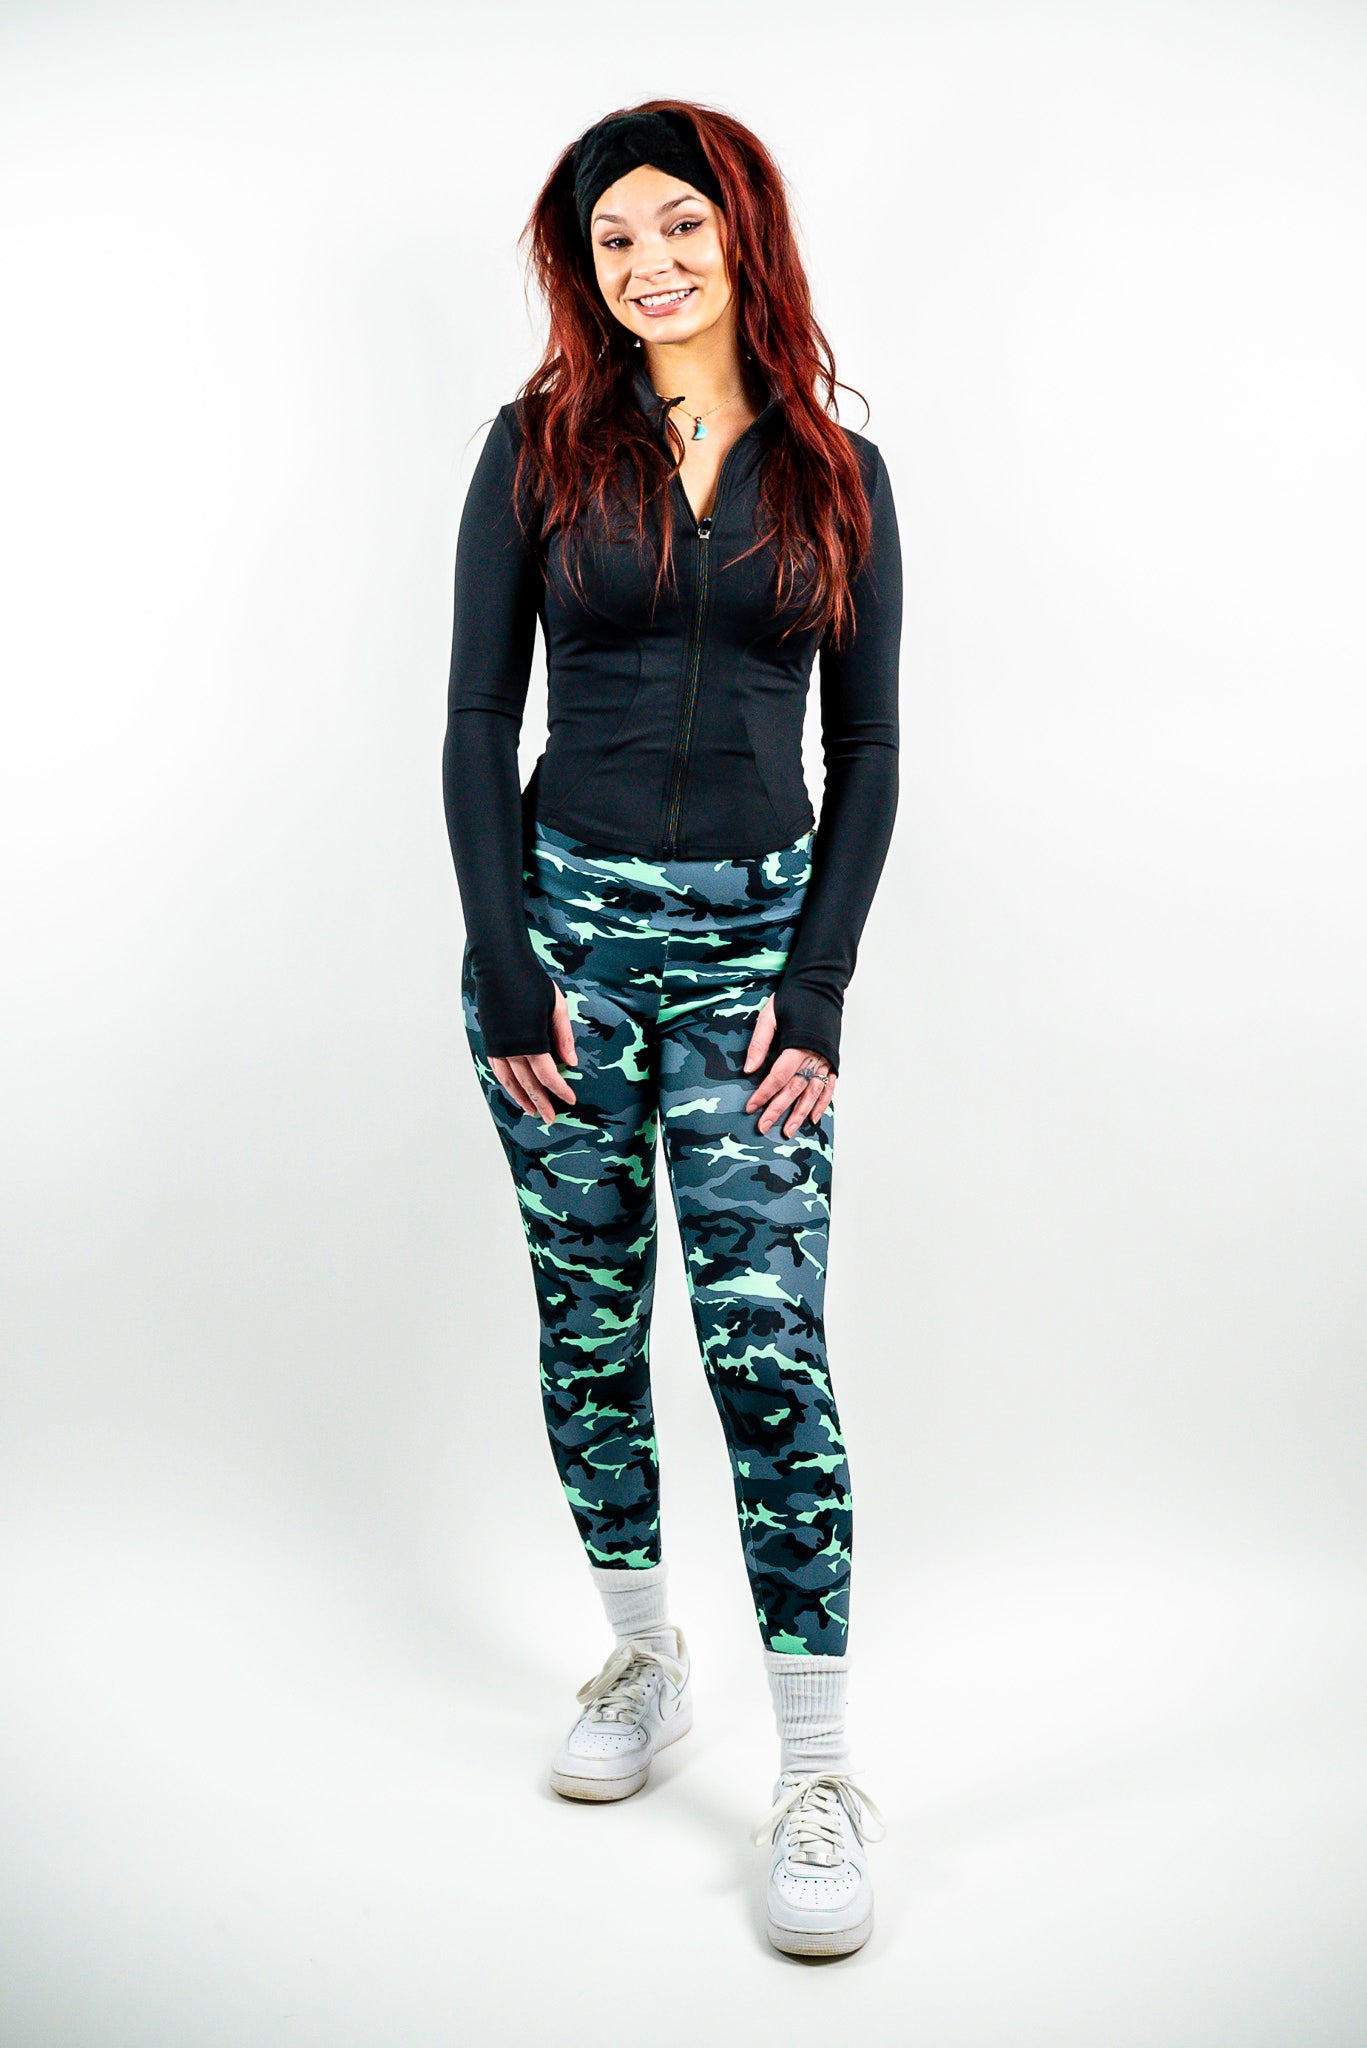 Beautiful Zoe is wearing size small. Hips are 39 inches and waist 27 inches. Mint camo fabric runs smaller in size, so size up if in between sizes.